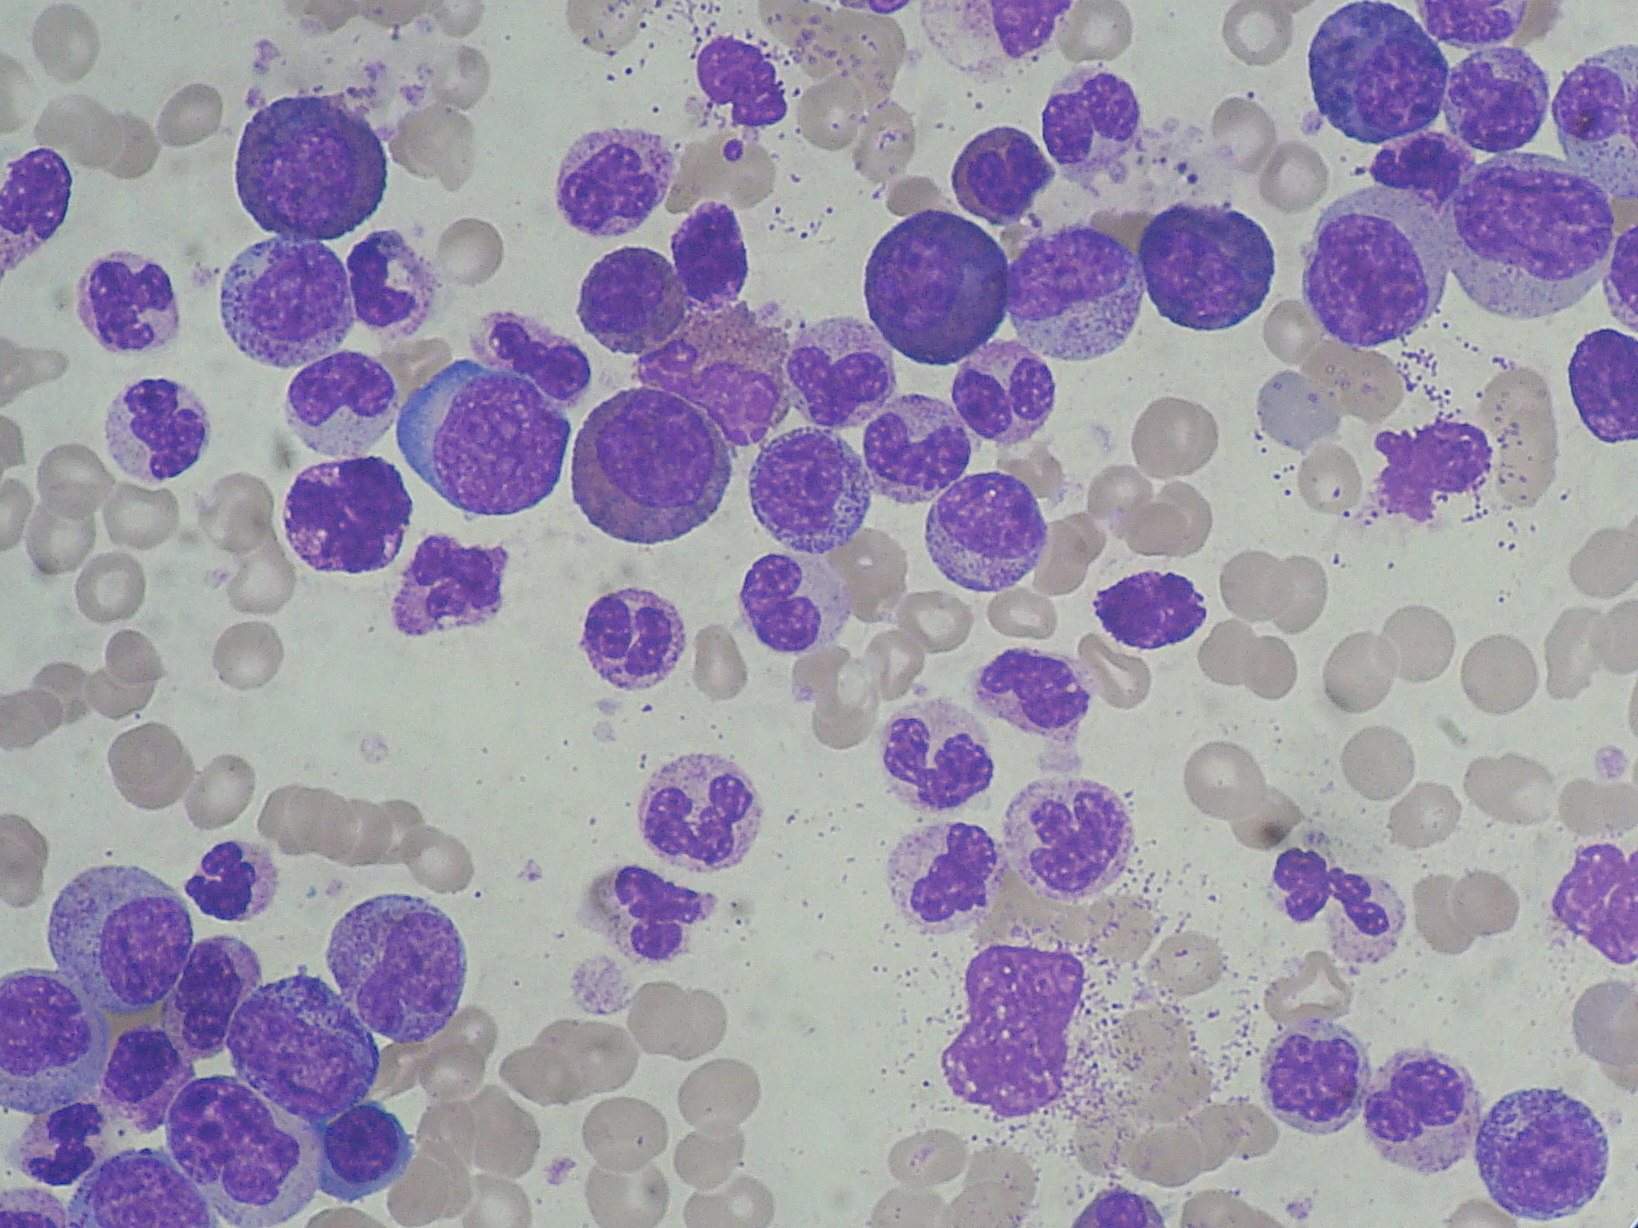 Blood smear from patient with CML showing increased granulocytes (source)